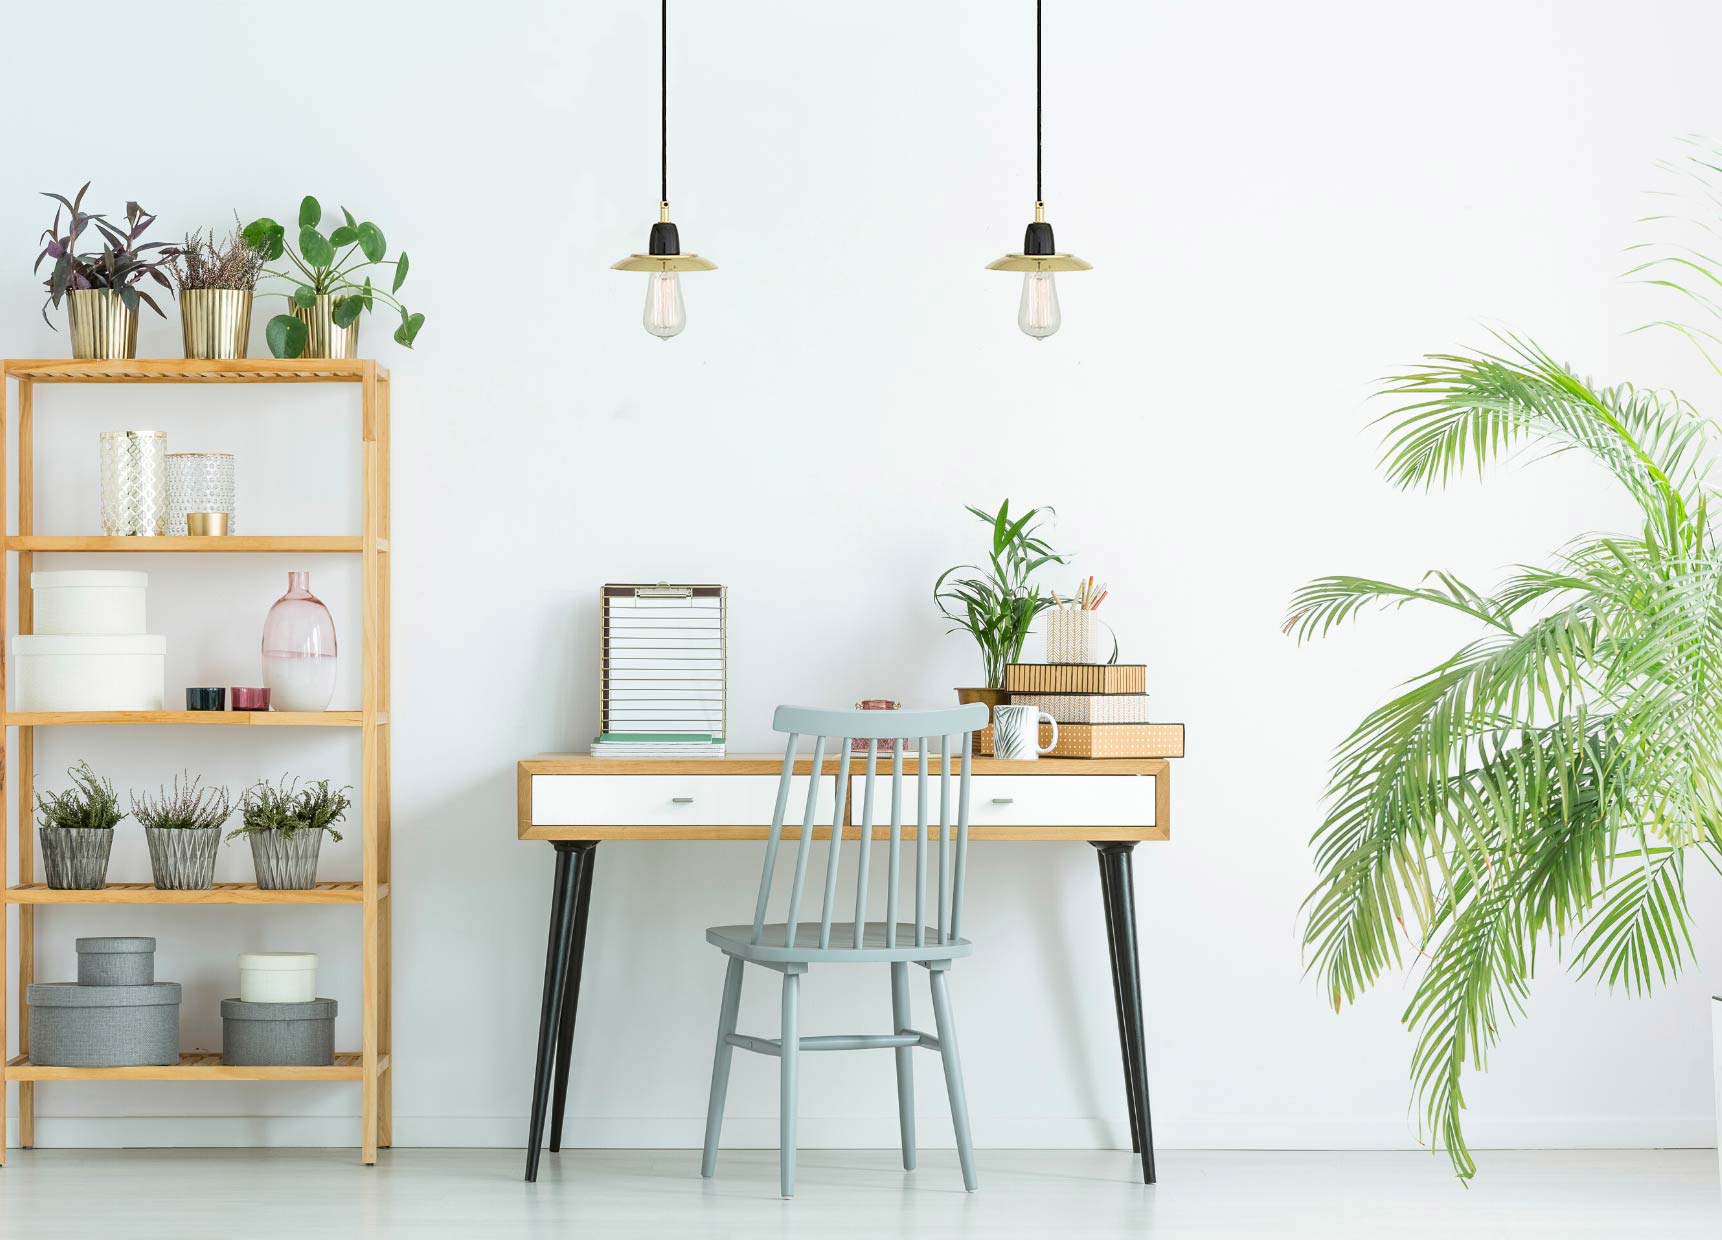 Five Lighting Tips for Your Home Office